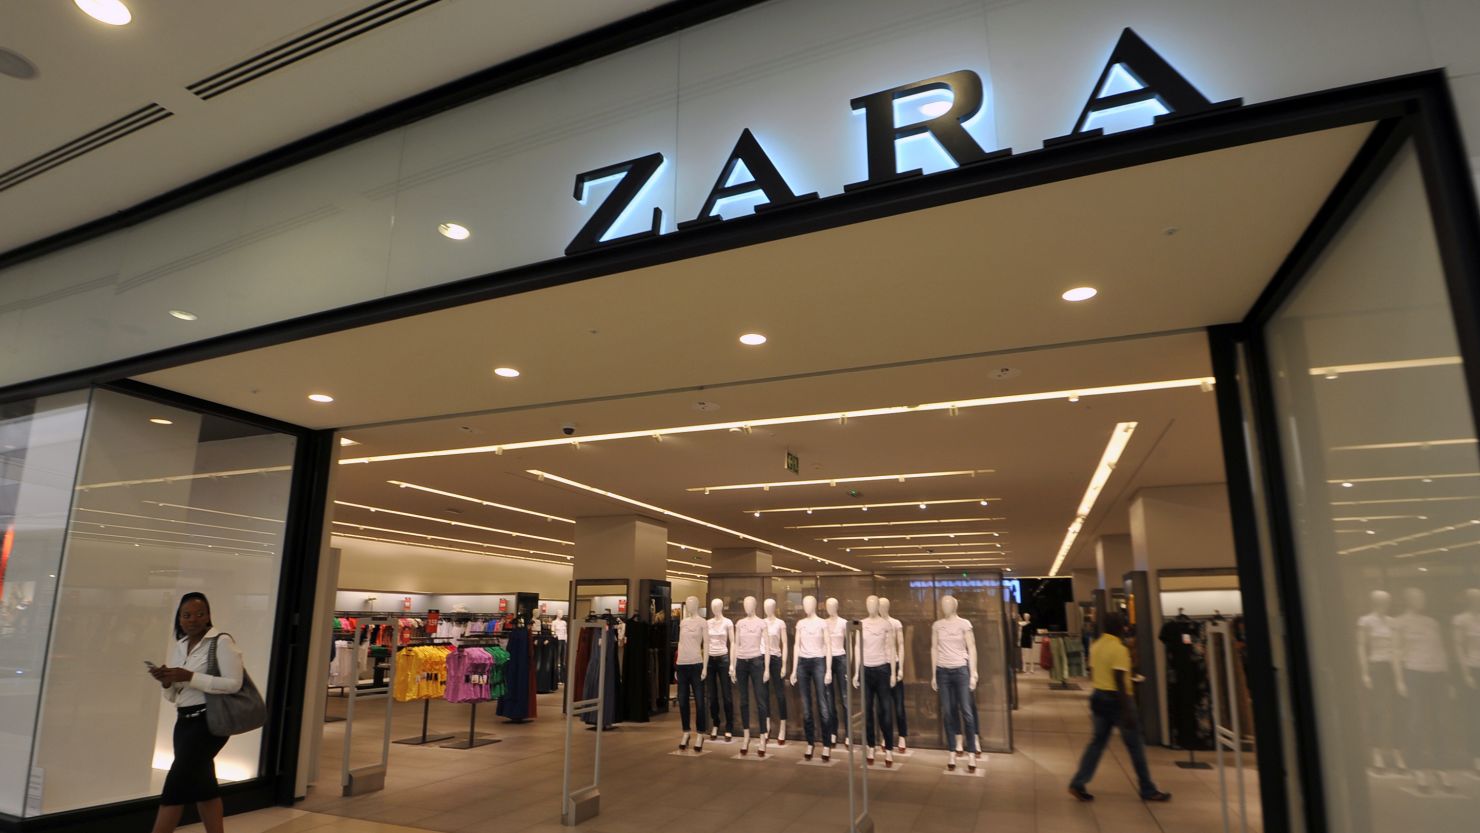 Rosalia Mera founded Zara with her then husband Amancio Ortega in 1975. It is one of the world's biggest retailers.